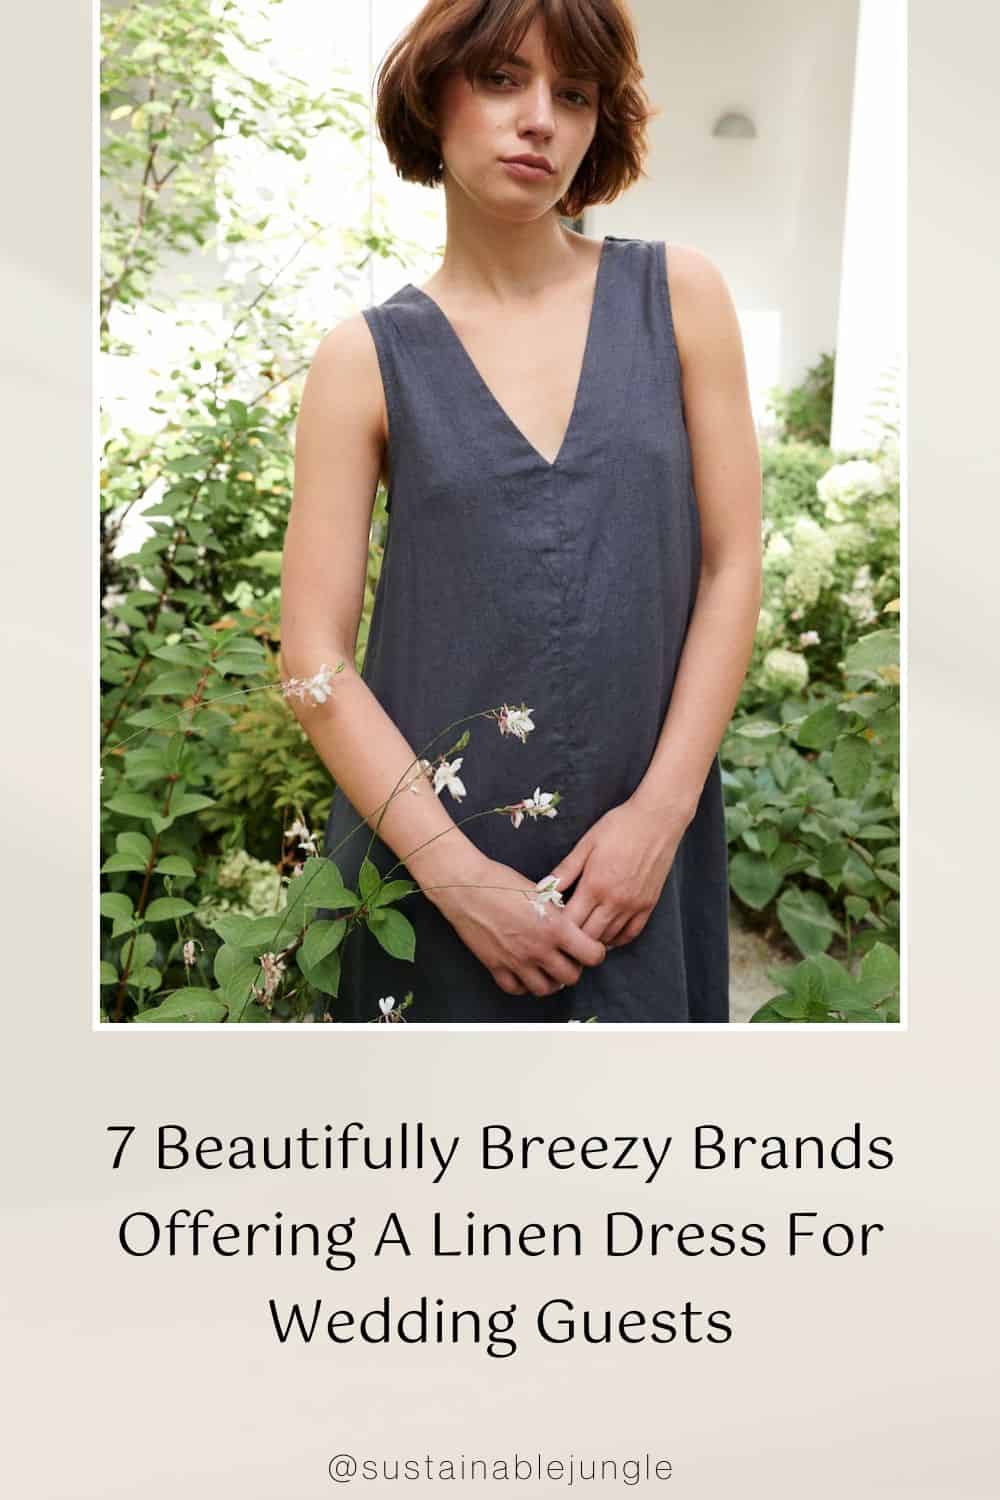 7 Beautifully Breezy Brands Offering A Linen Dress For Wedding Guests Image by LinenFox #linendressforweddingguest #linendressesforweddingguests #linendressesforweddings #linenweddingguestdresses #etsylinenweddingguestdress #sustainablejungle